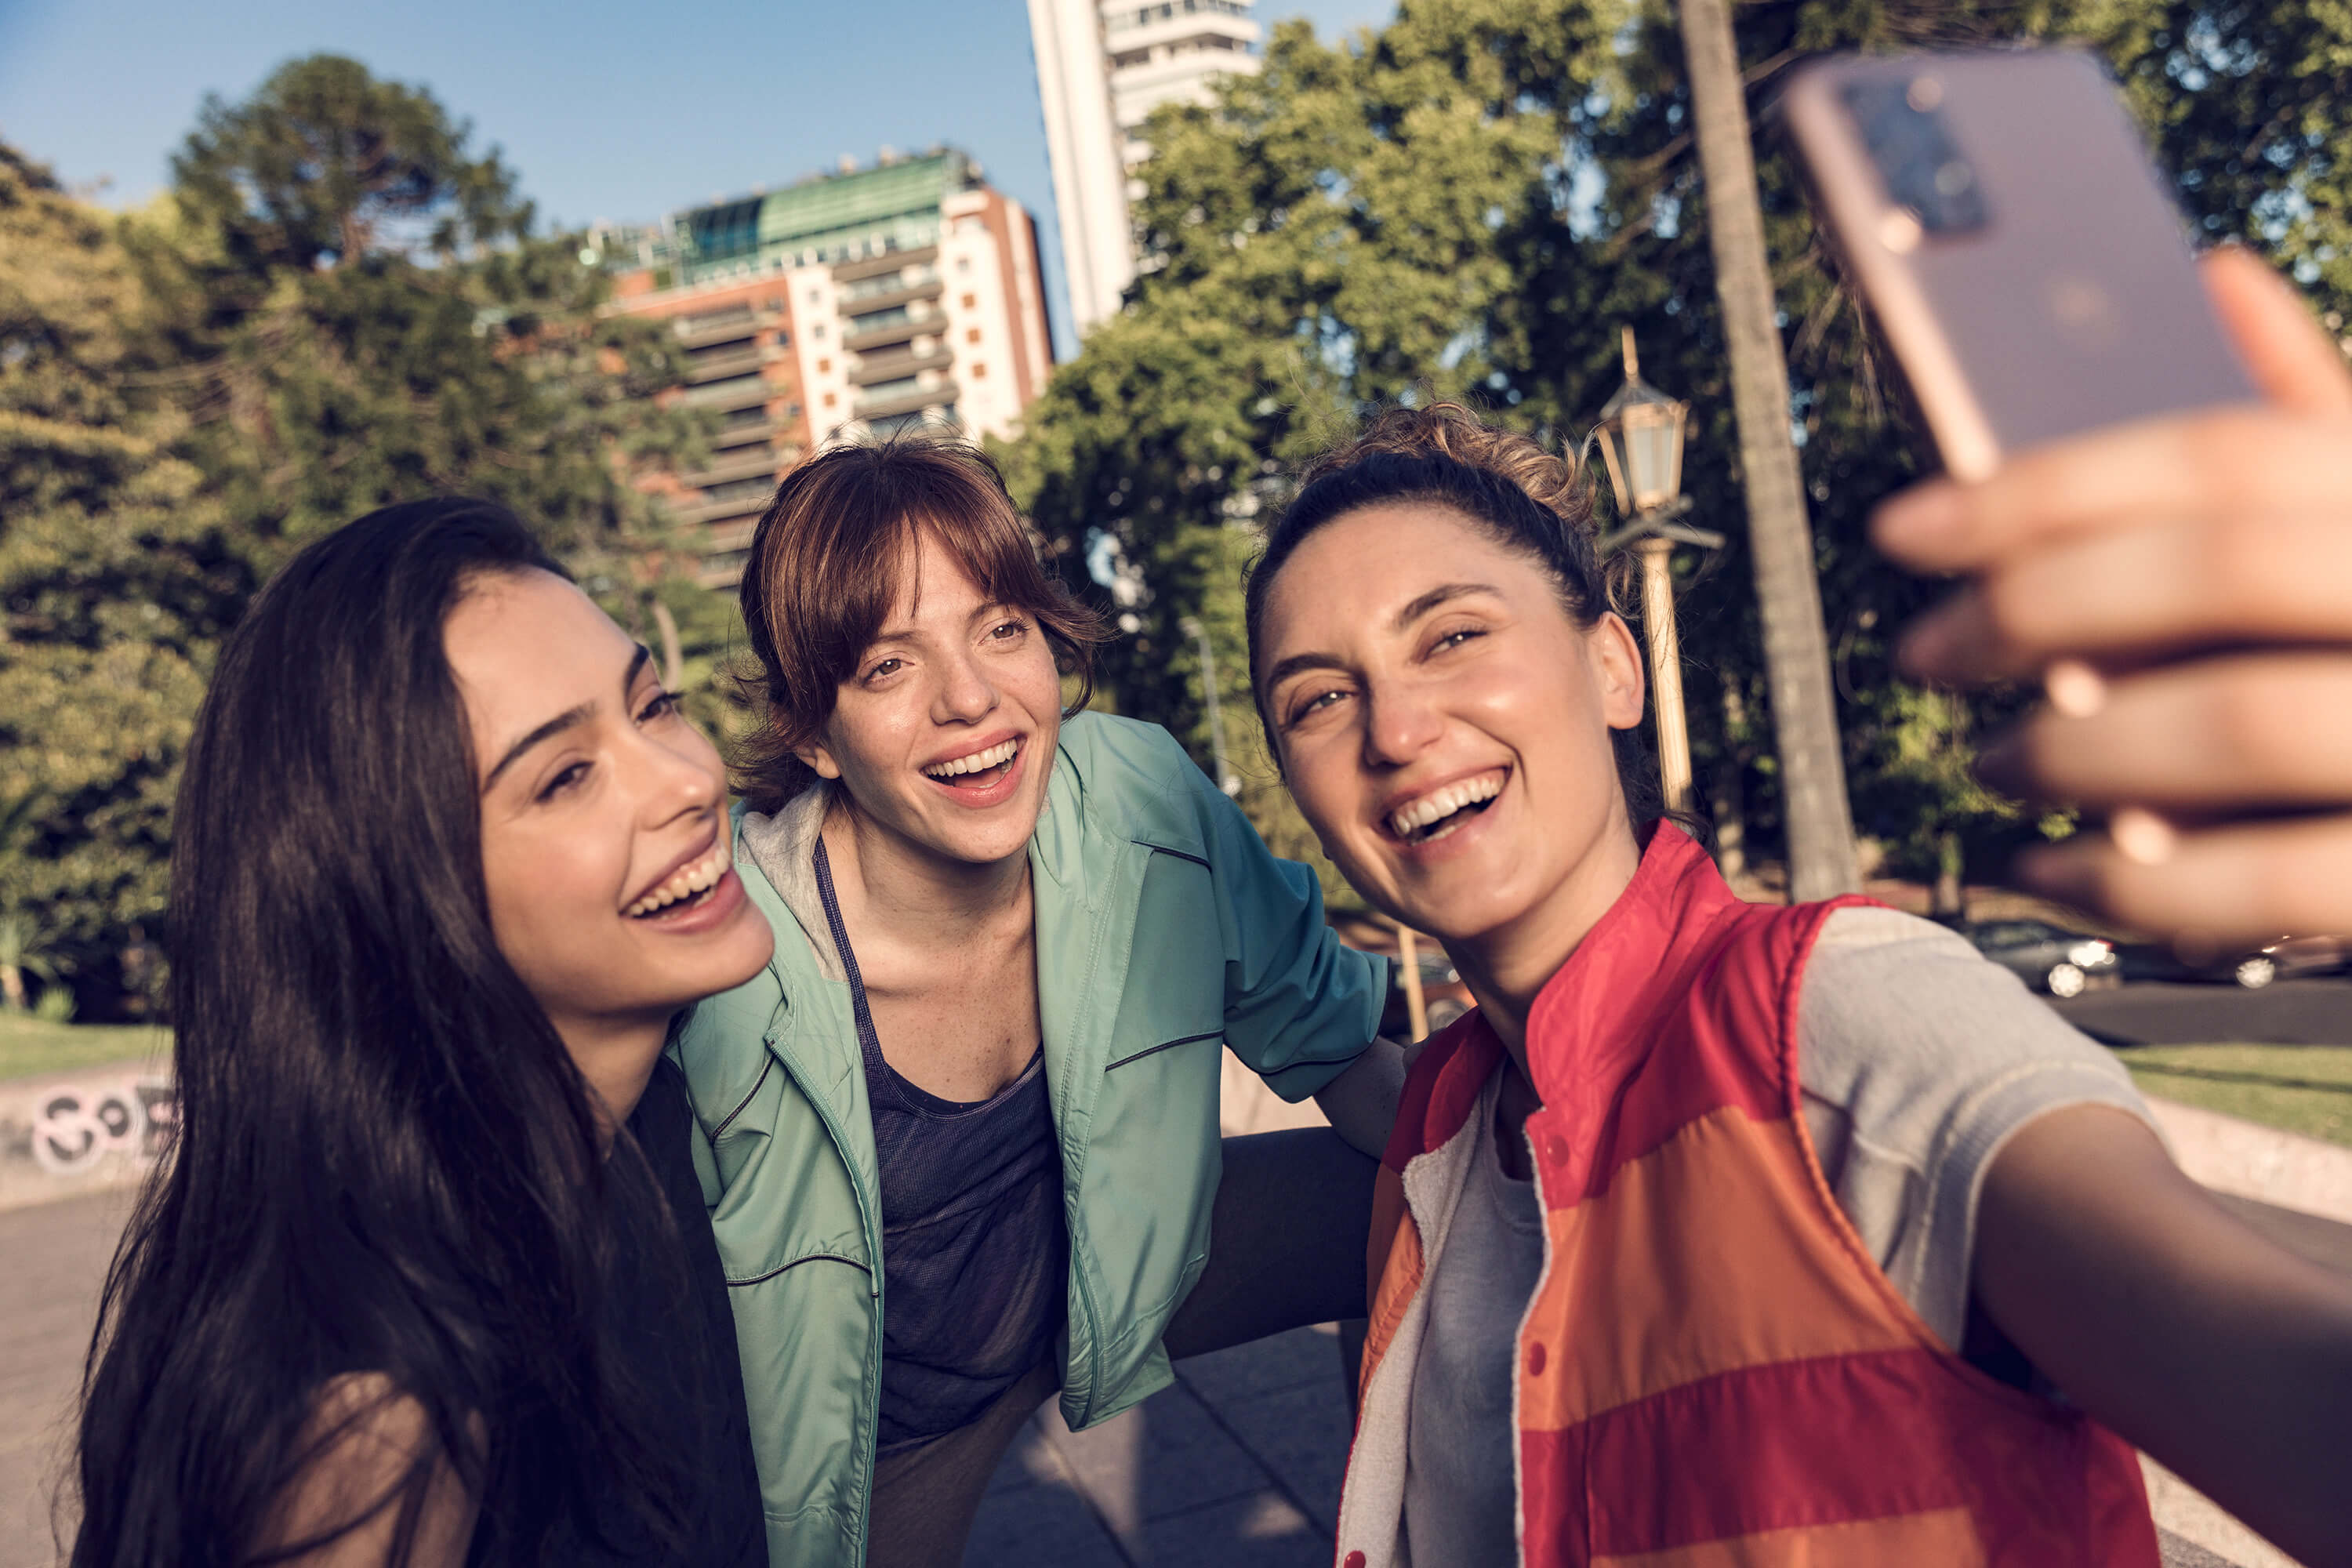 A group of women taking a selfie in the park